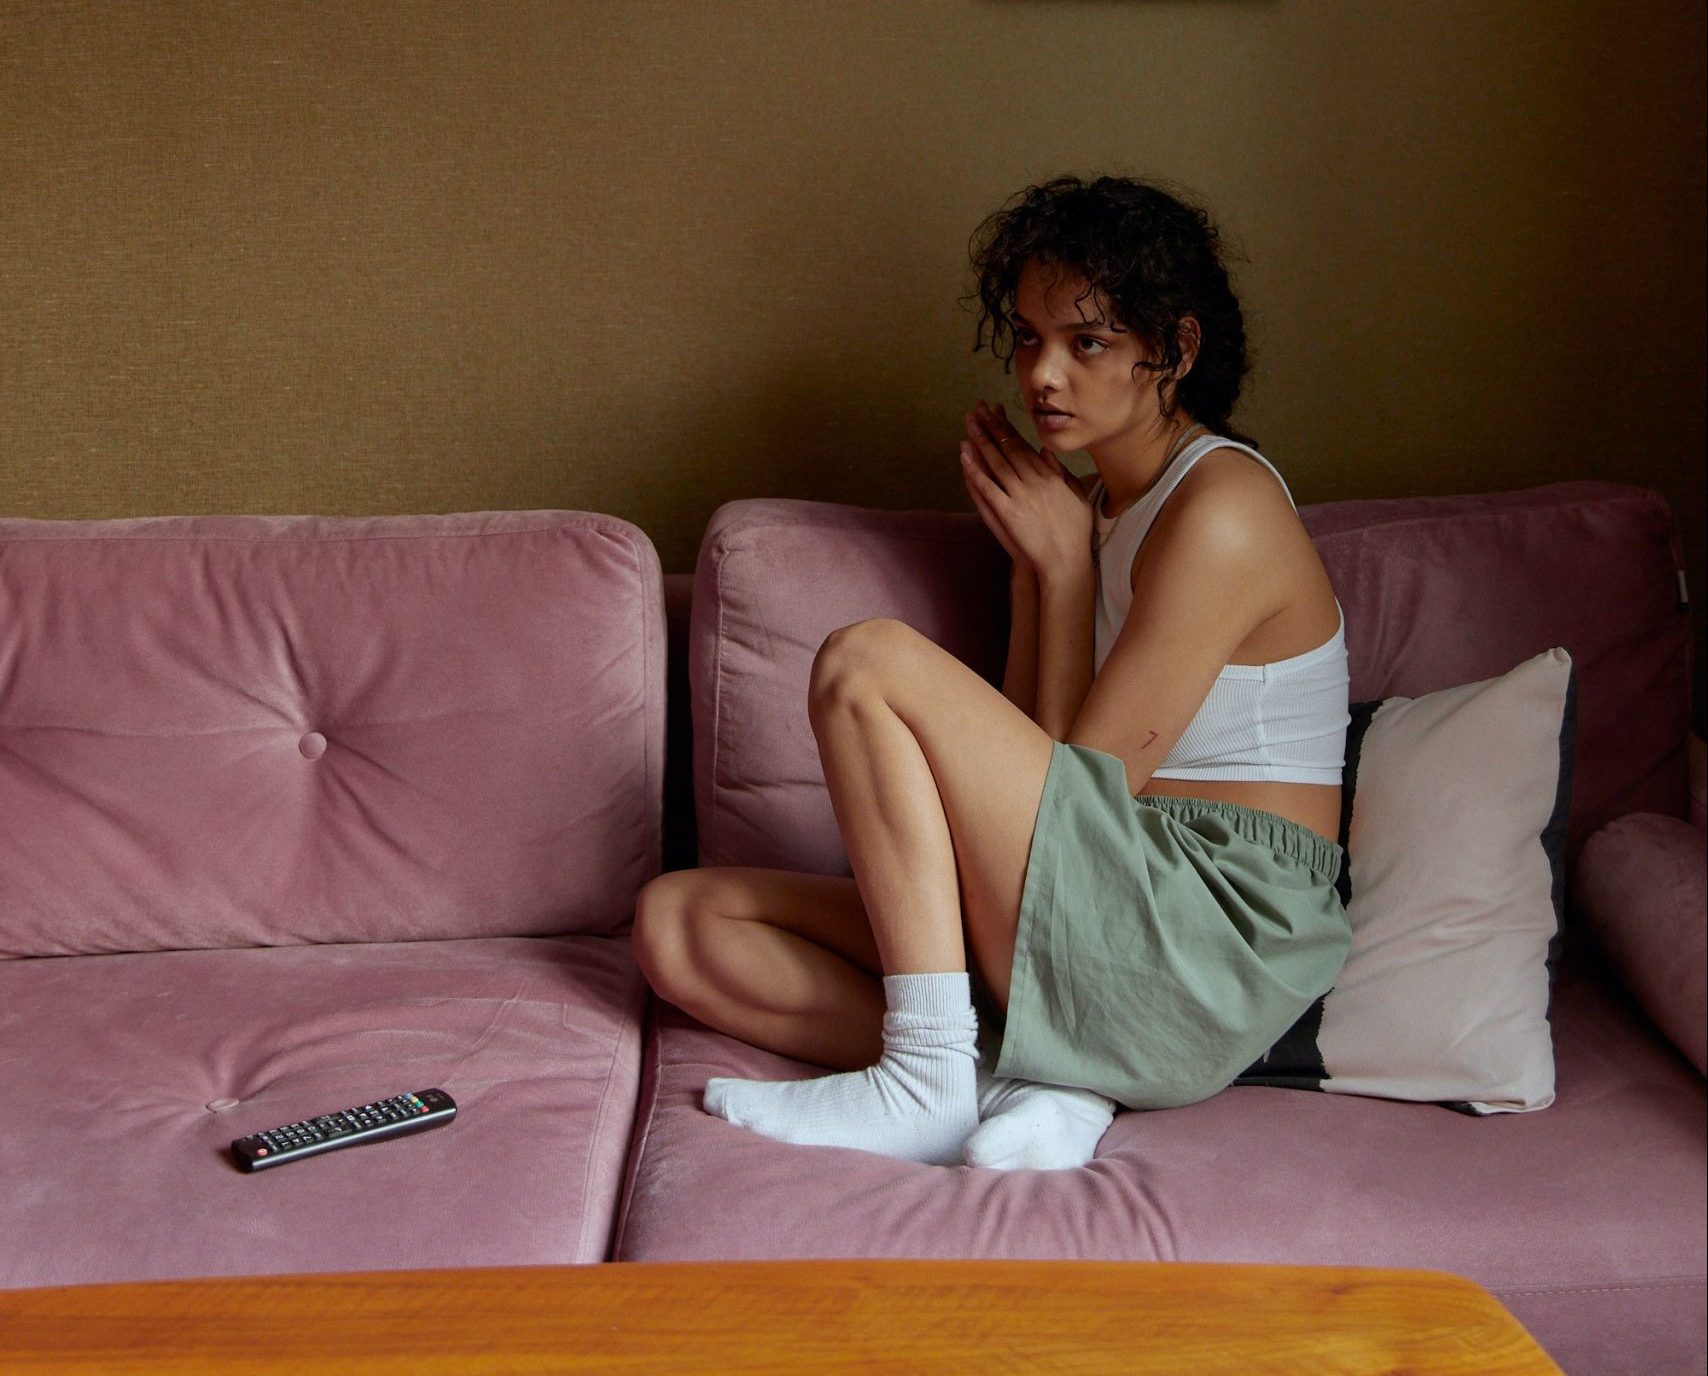 A young woman wears a crop top, shorts and white socks. She sits huddled up on a pink sofa looking pensieve.